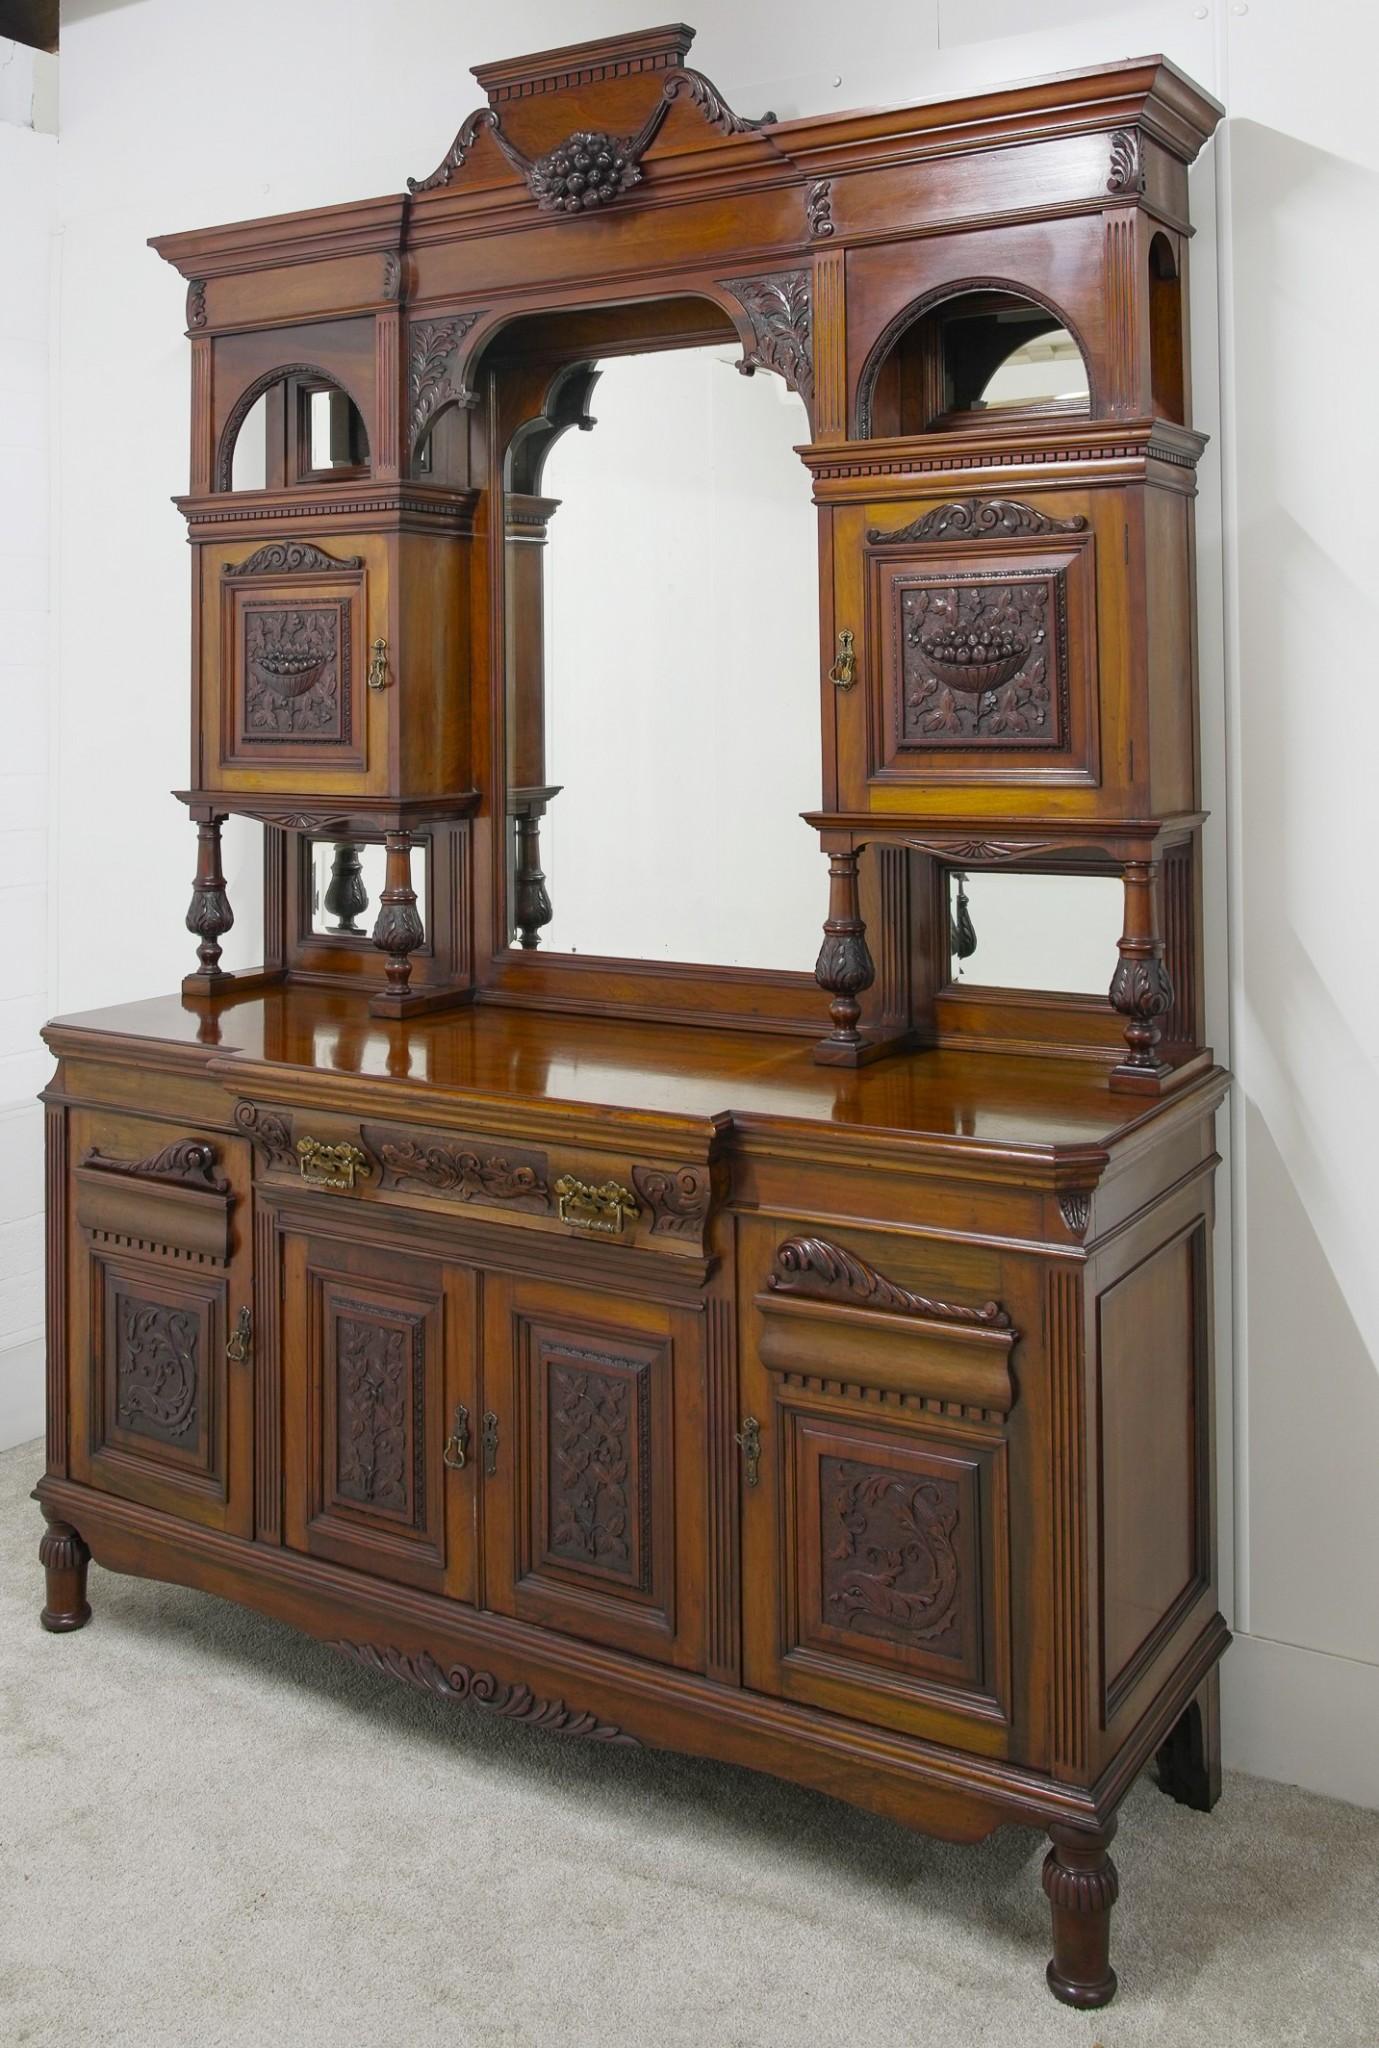 Gorgeous Victorian sideboard in mahogany
Features intricate carved details on many surfaces including elaborate door panels
Further carved motifs include floral garlands, leaves and fruit bowls
Piece features a mirrored back which would be a great